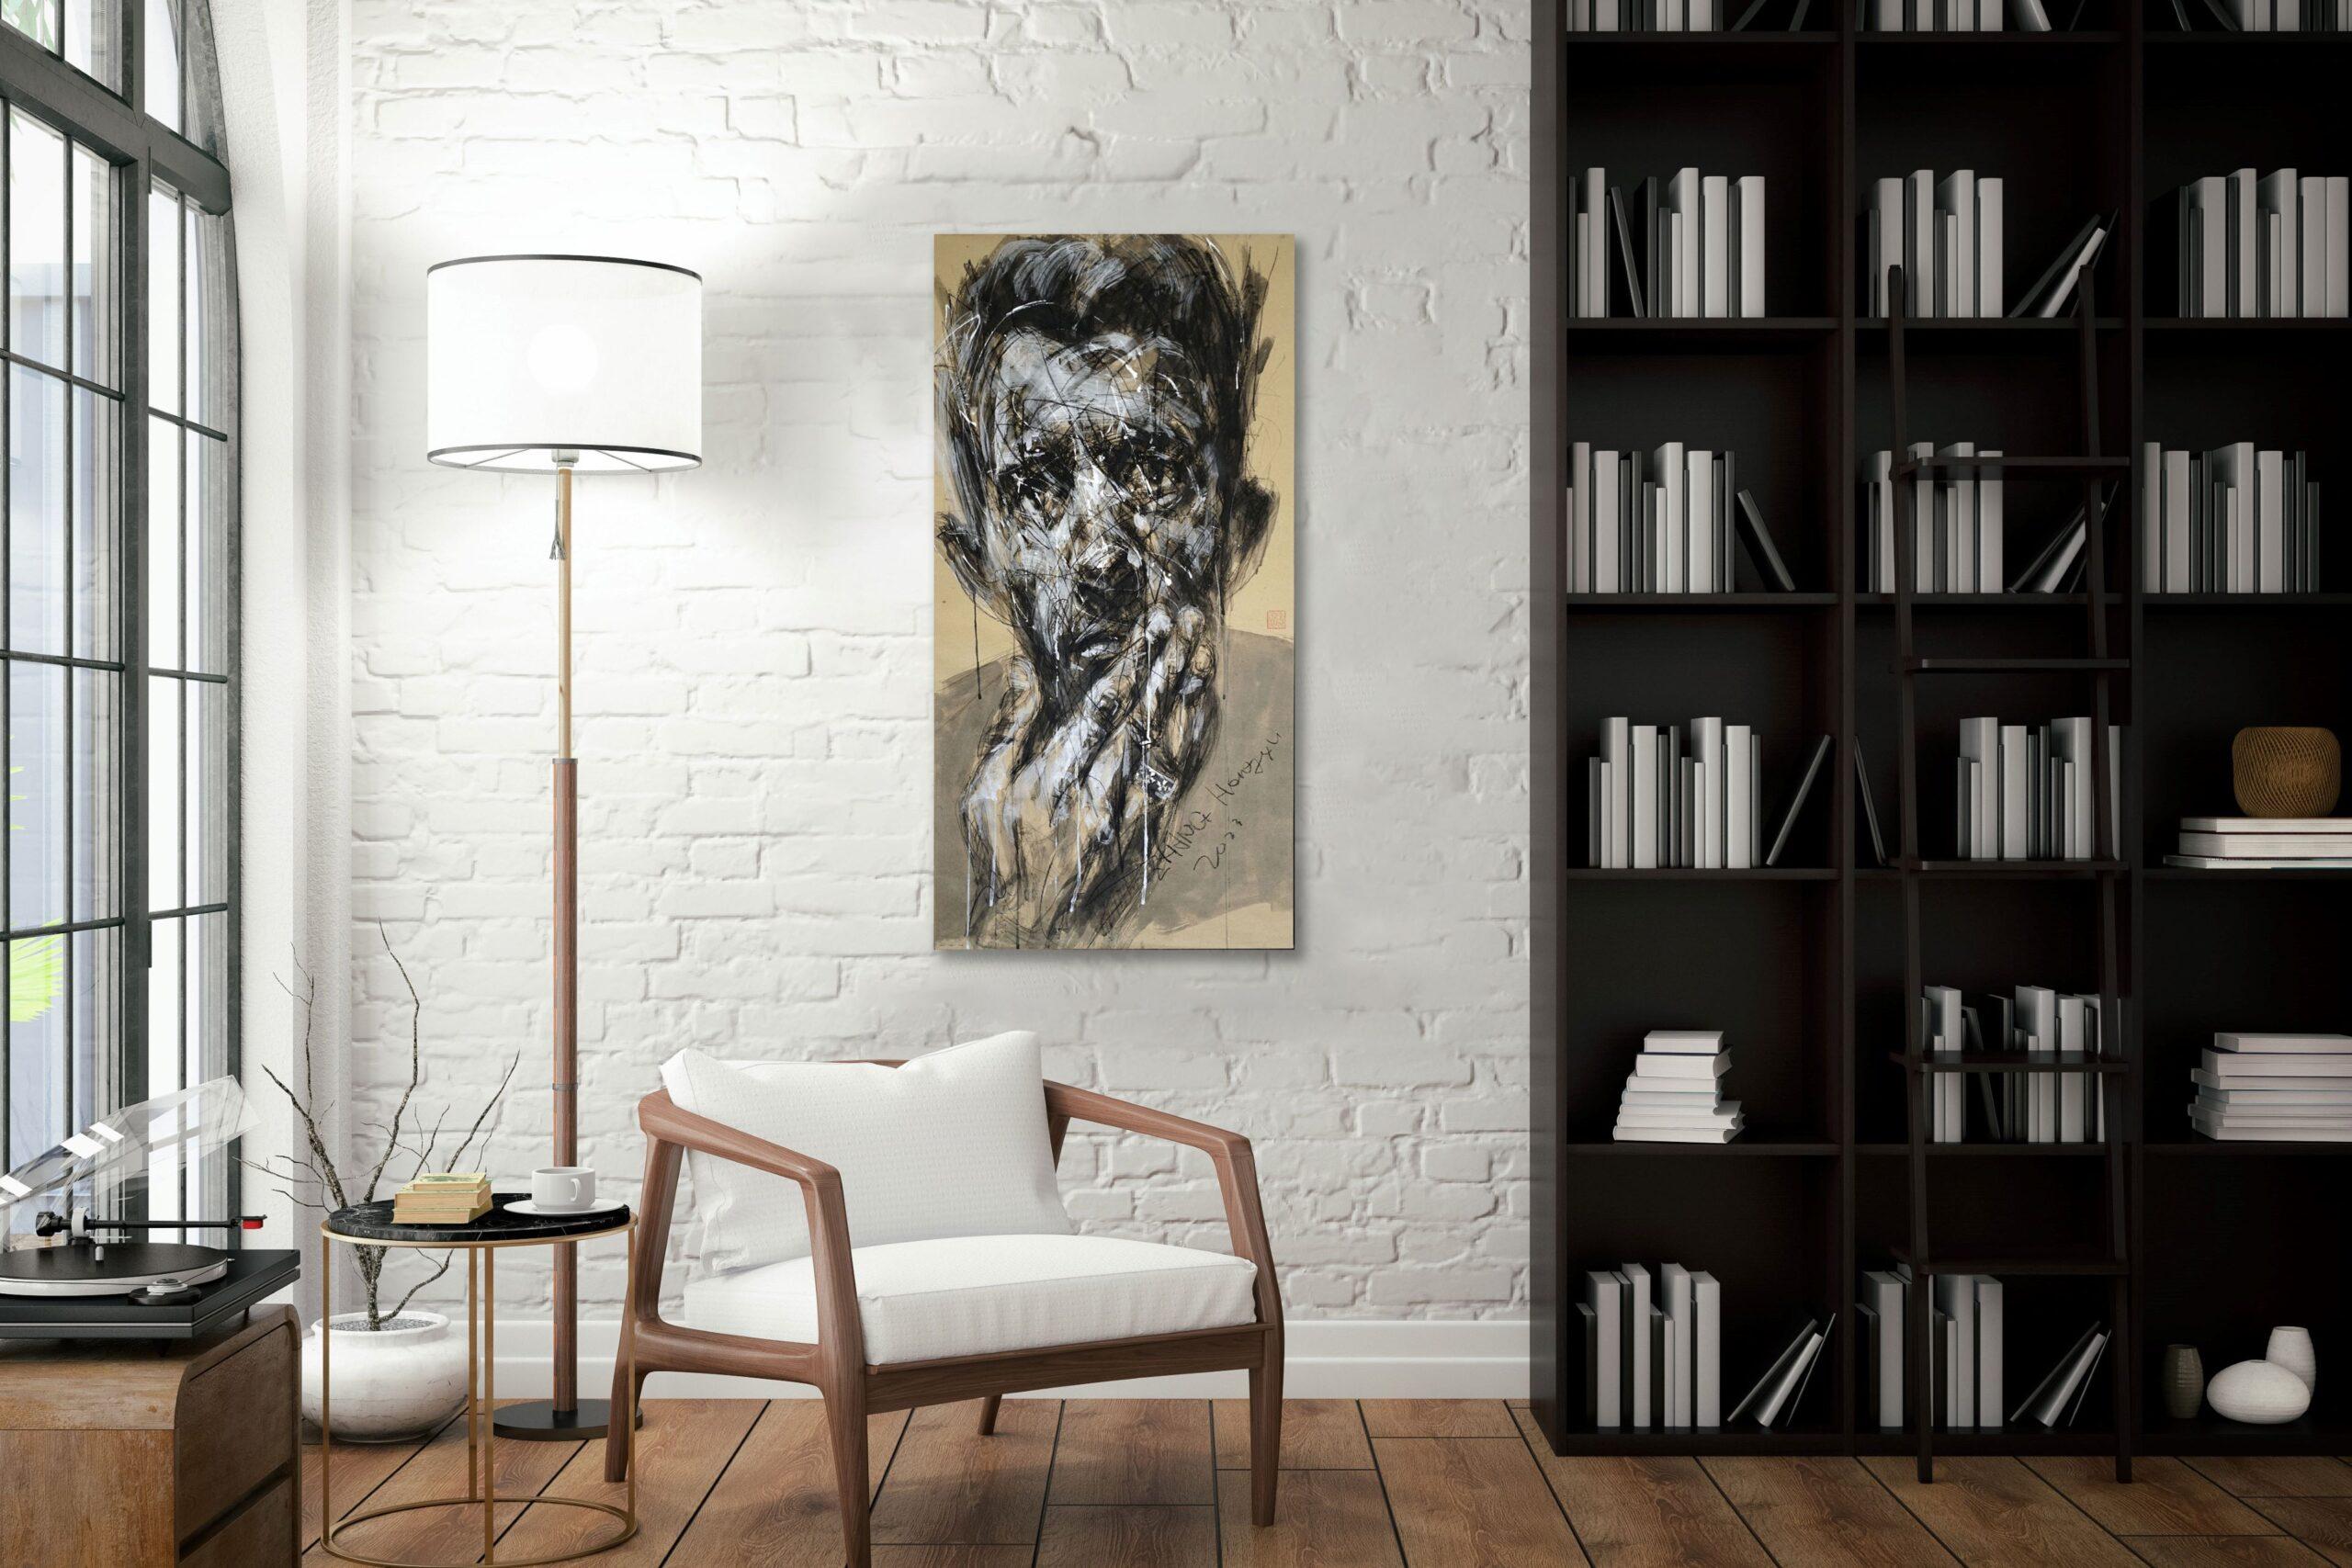 No. 215 is a unique painting by contemporary artist Hongyu Zhang. The painting is made with Indian ink and charcoal on paper mounted on canvas, dimensions are 120 × 60 cm (47.2 × 23.6 in). Dimensions of the framed artwork are 125 x 65 cm (49.2 x